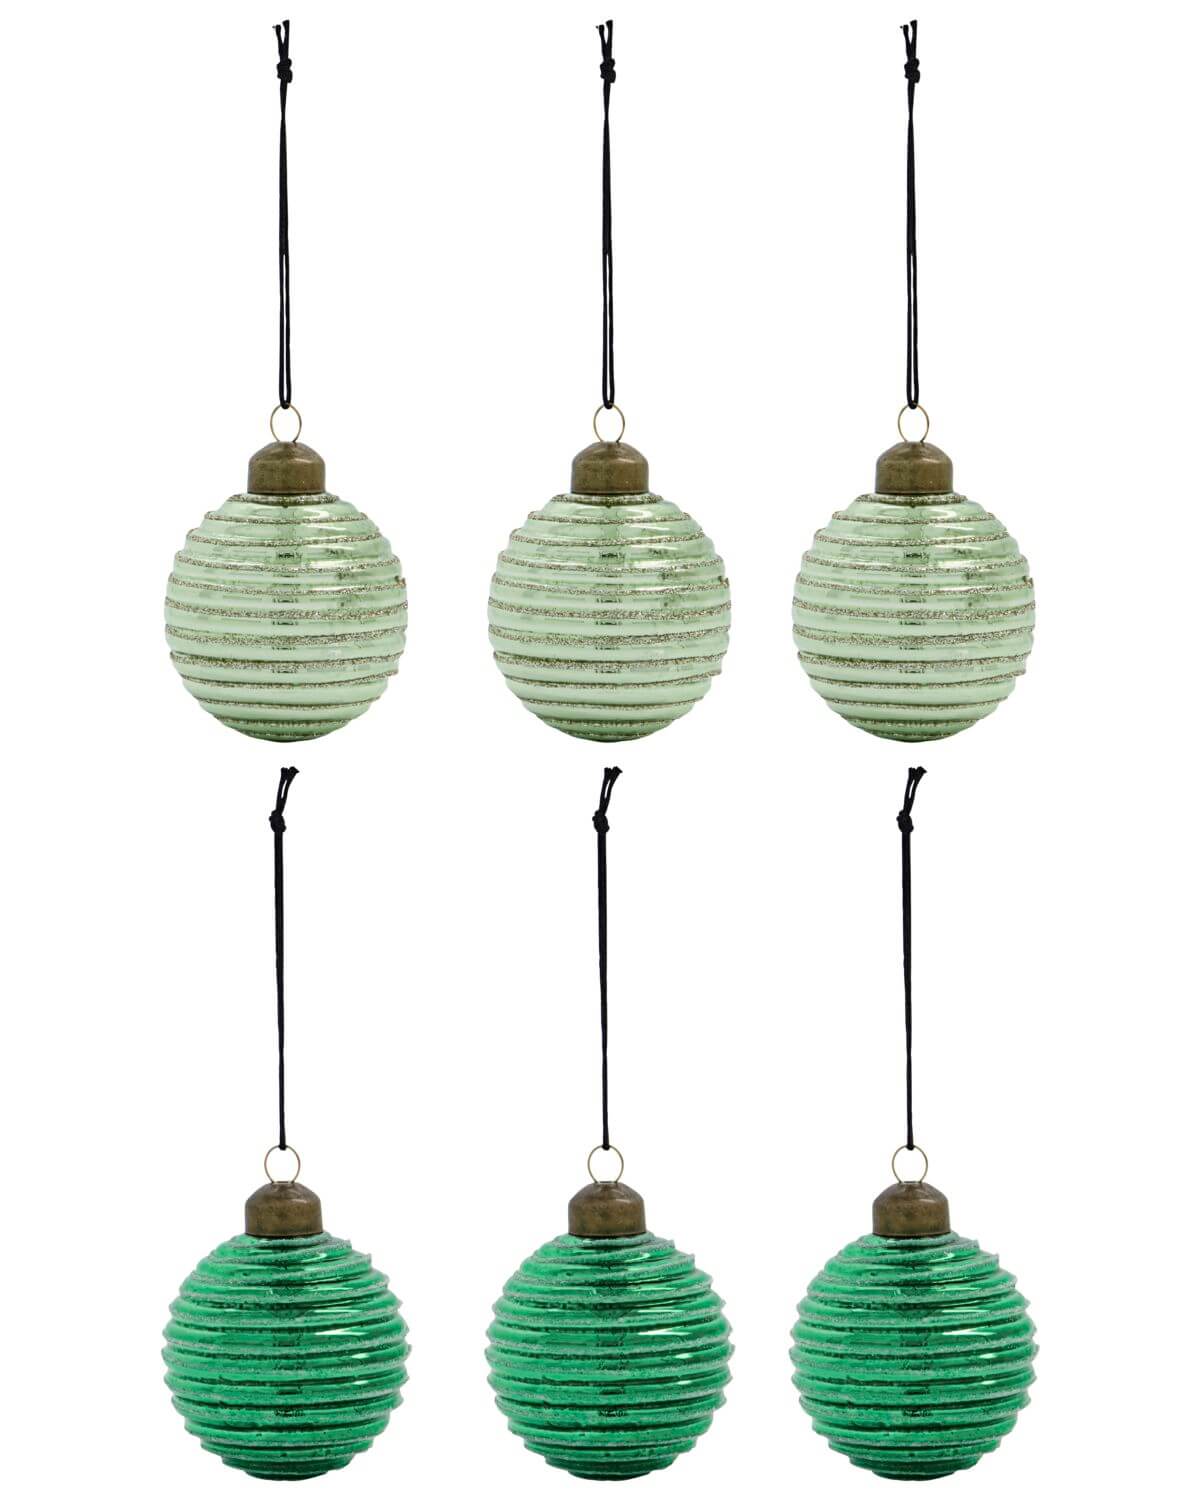 Lolli Ornament | Green | Glass | by House Doctor - Lifestory - House Doctor